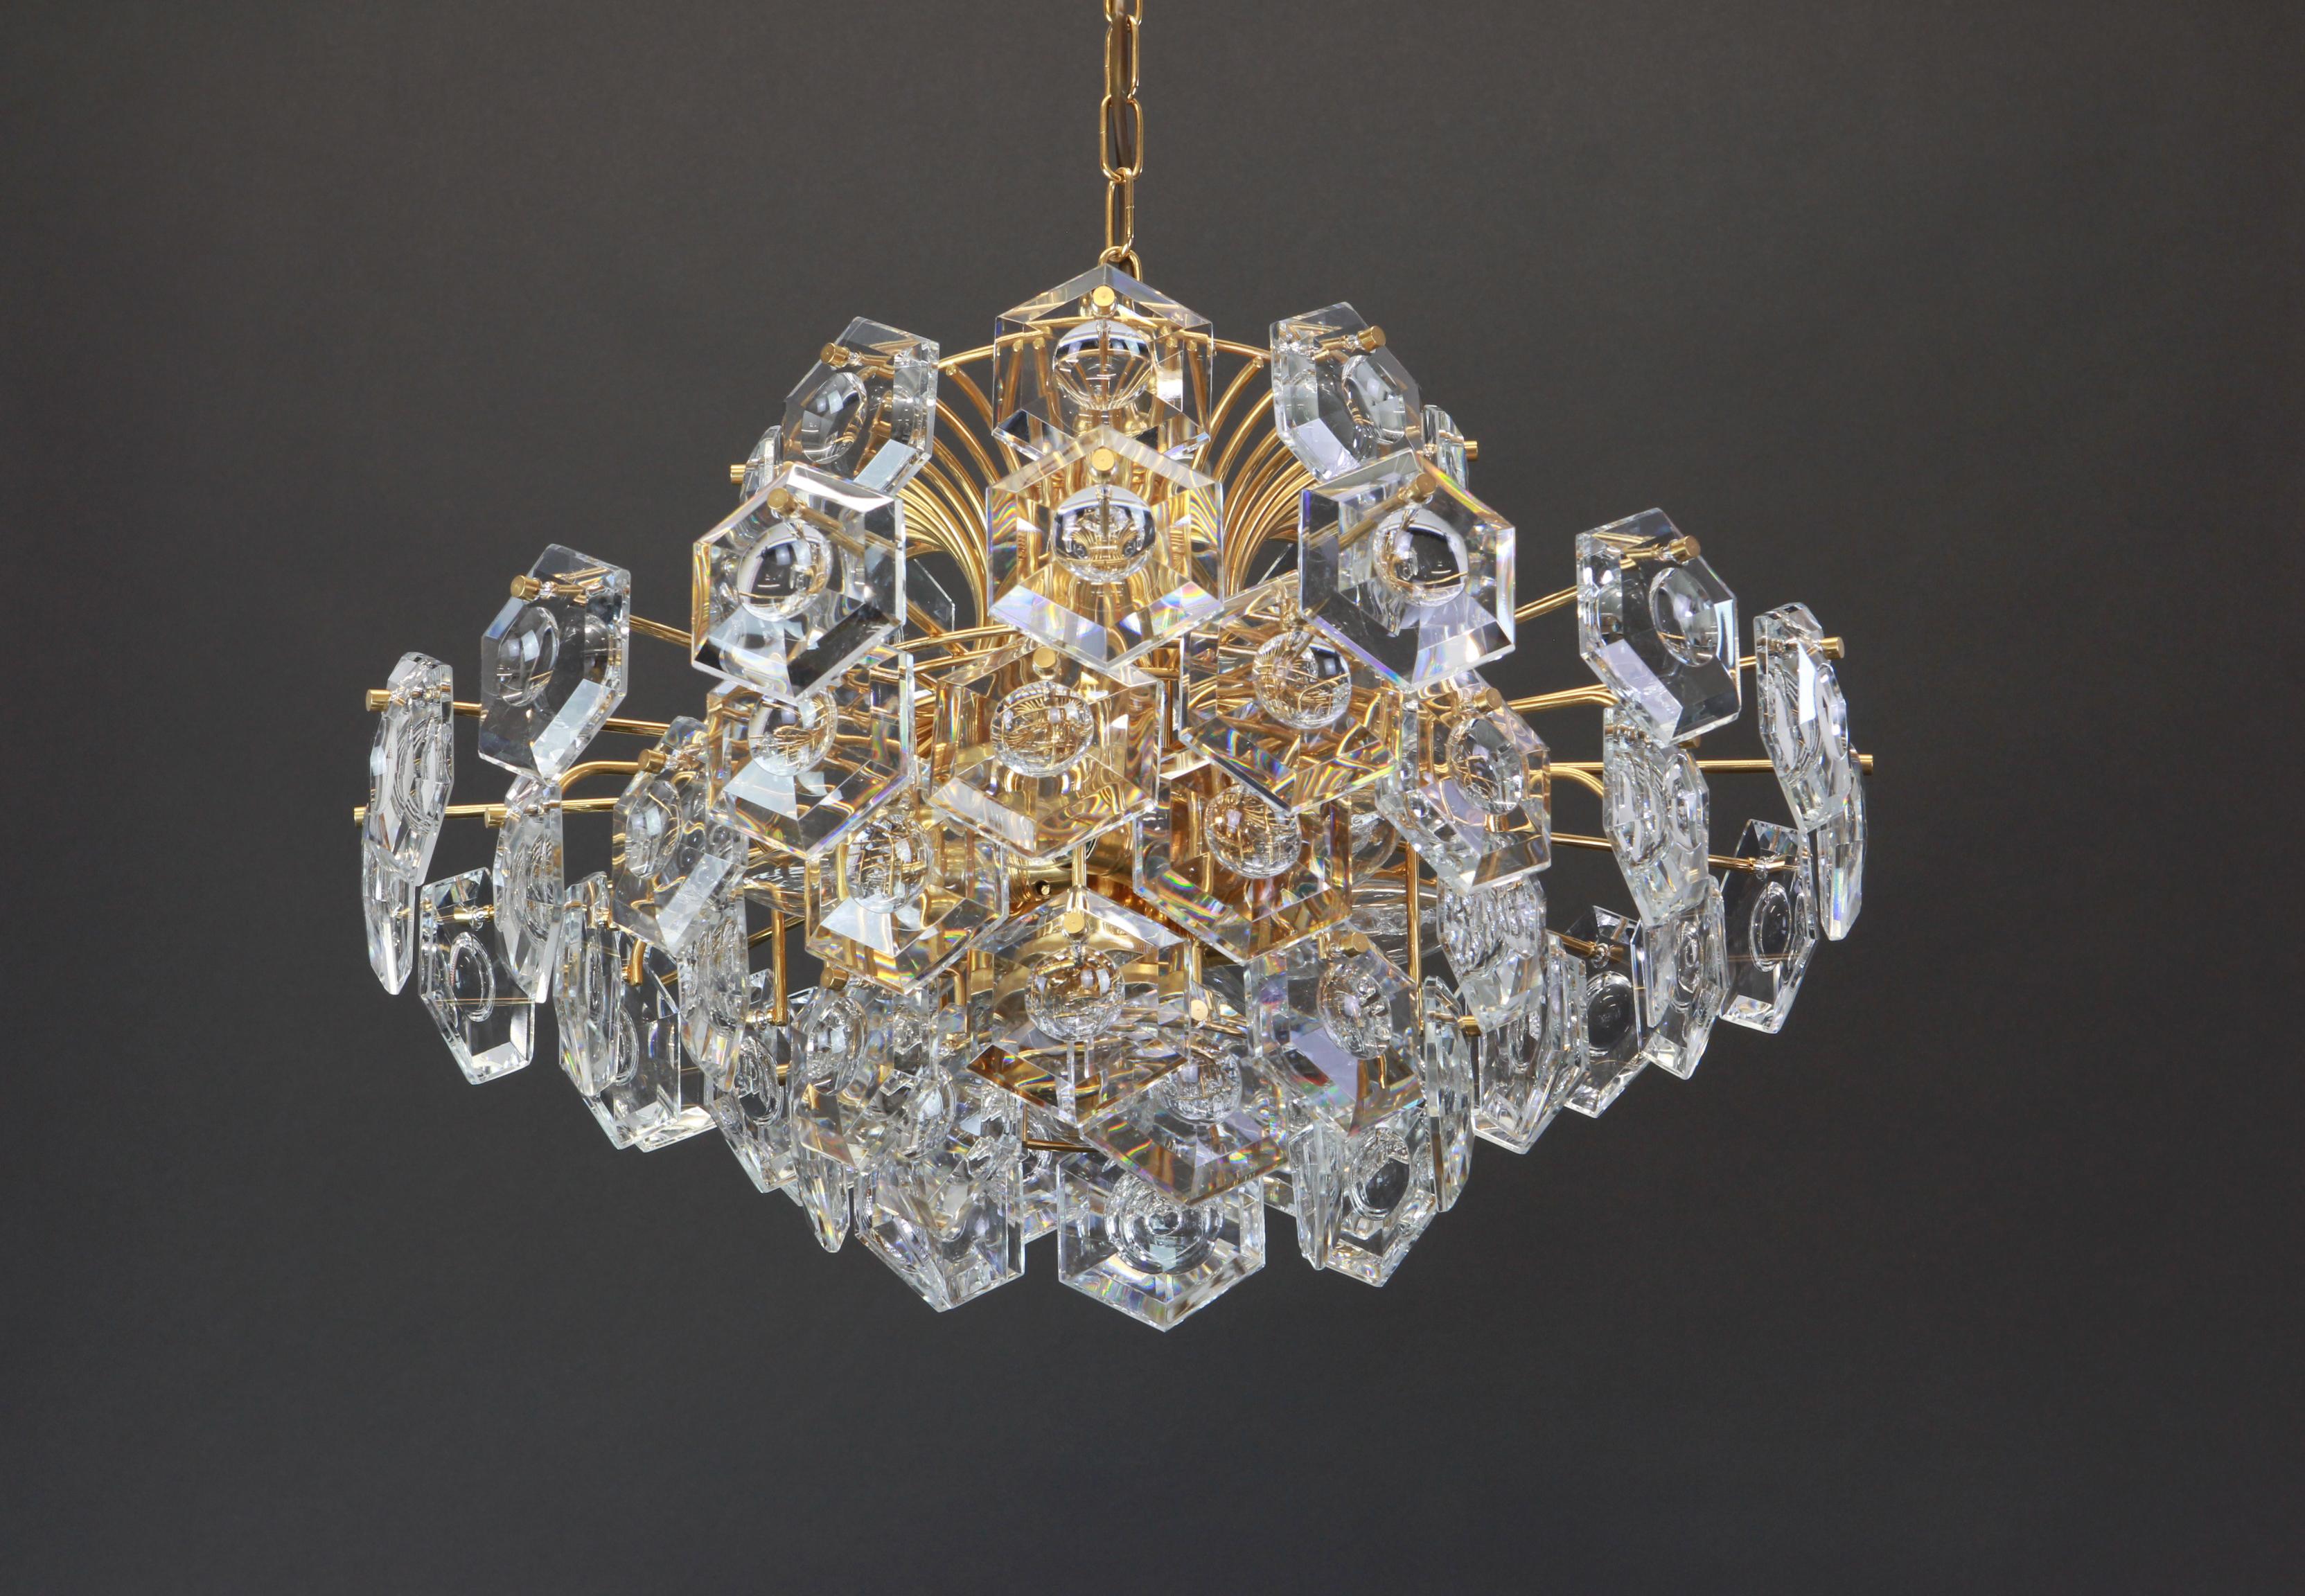 A stunning six-tier chandelier by Kinkeldey, Germany, manufactured in, circa 1960-1969. A handmade and high quality piece. The chandelier features a 24-karat gold-plated eight-tier structure from which 61 quality multifaceted crystals are